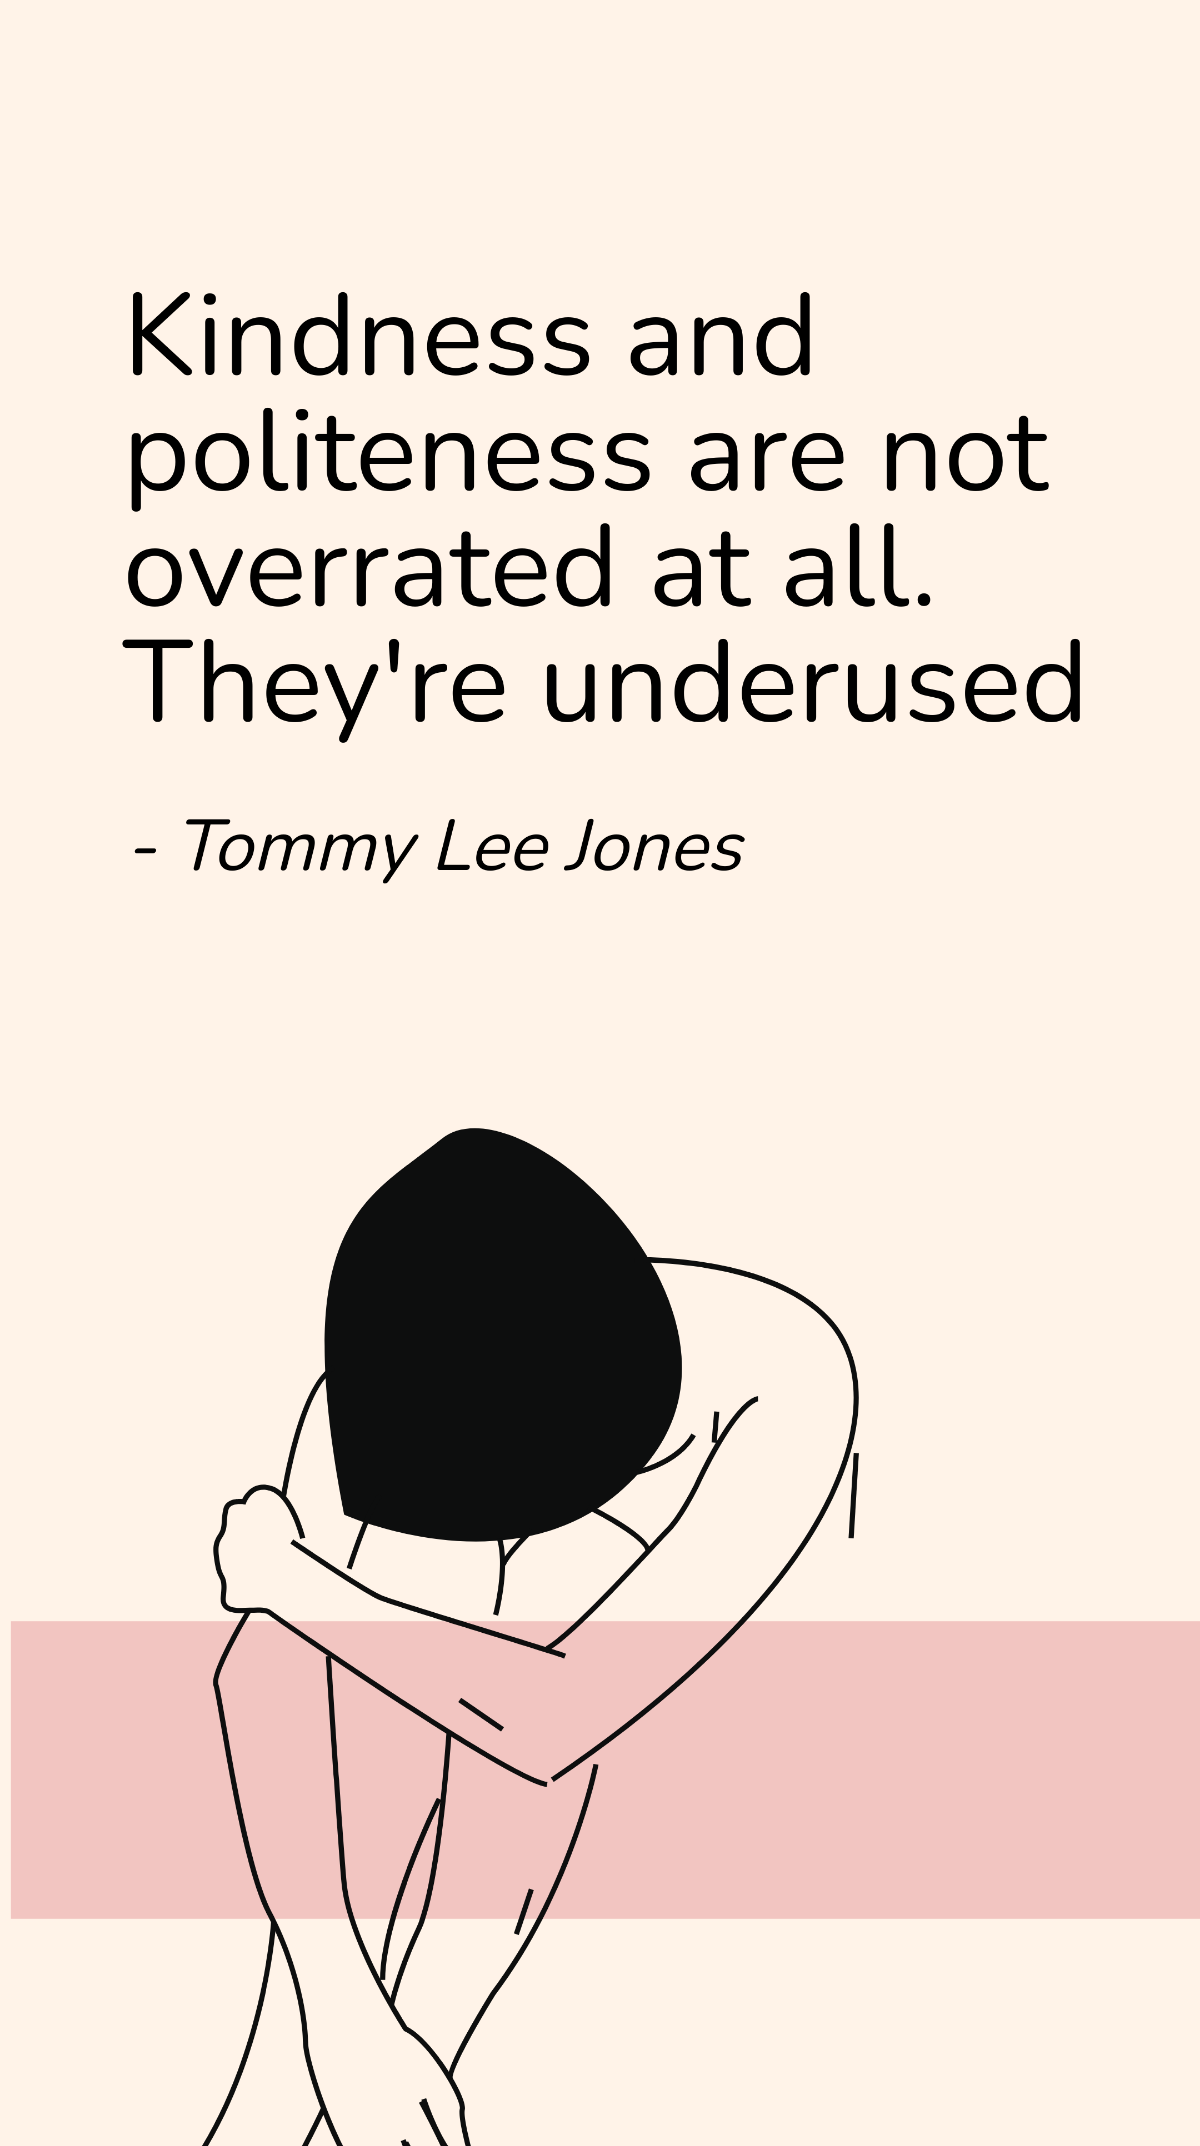 Free Tommy Lee Jones - Kindness and politeness are not overrated at all. They're underused Template